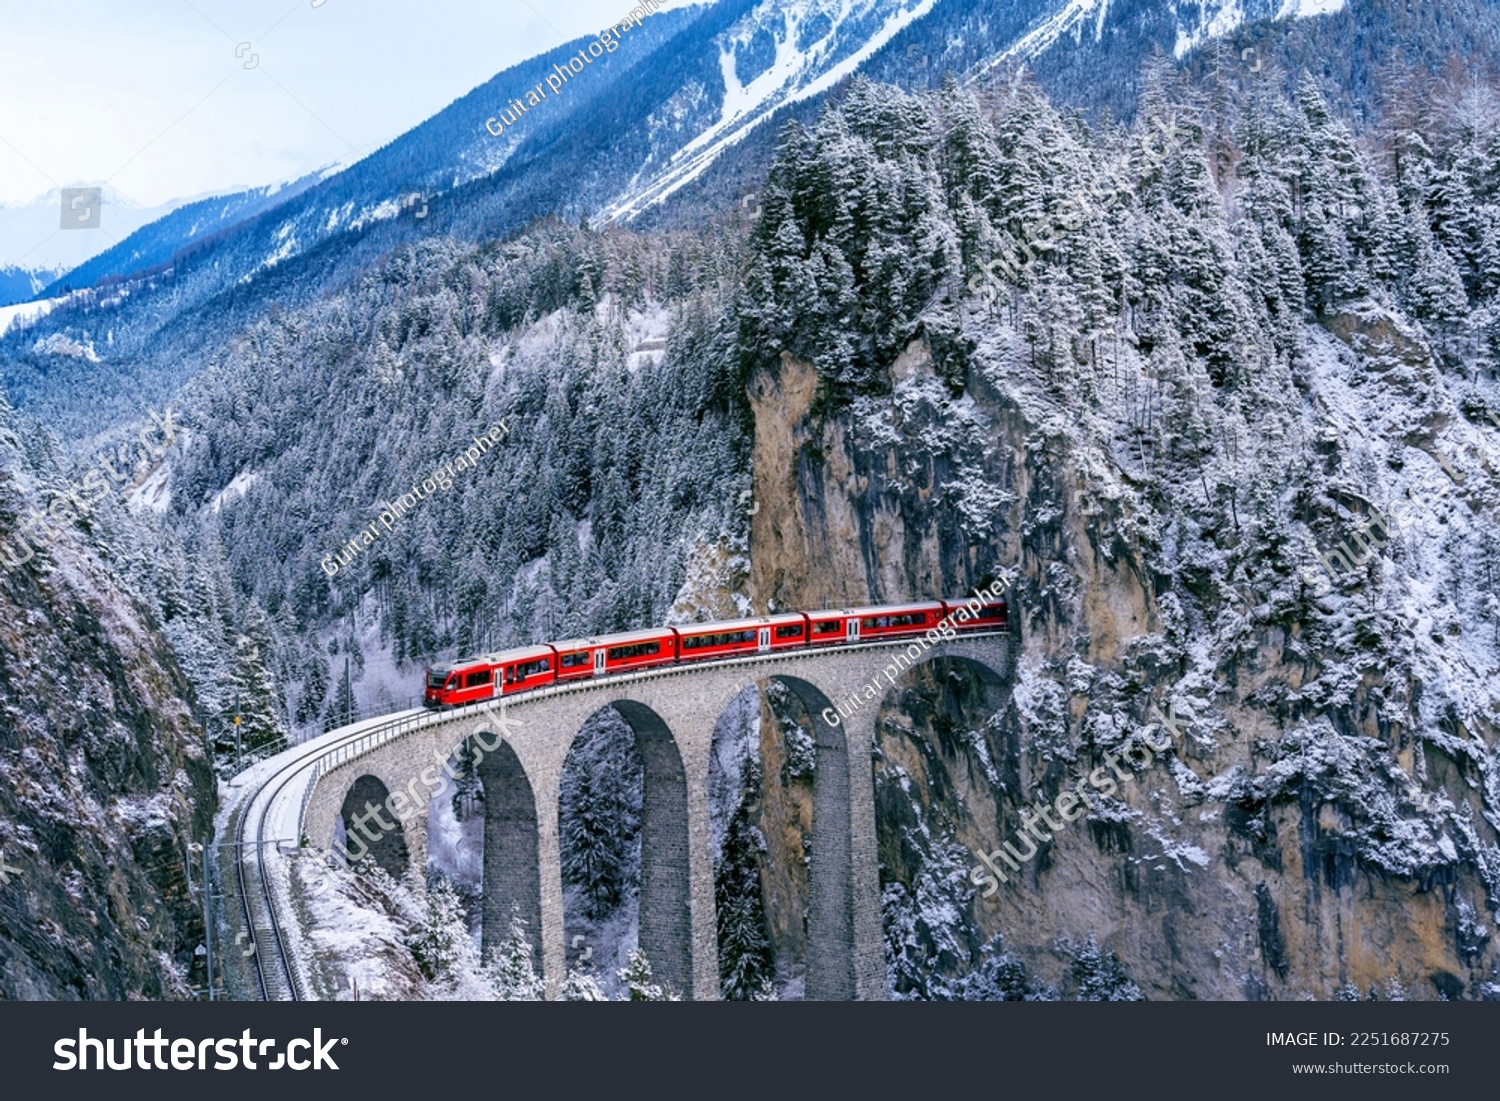 Aerial view of Train passing through famous mountain in Filisur, Switzerland. Landwasser Viaduct world heritage with train express in Swiss Alps snow winter scenery.  #2251687275